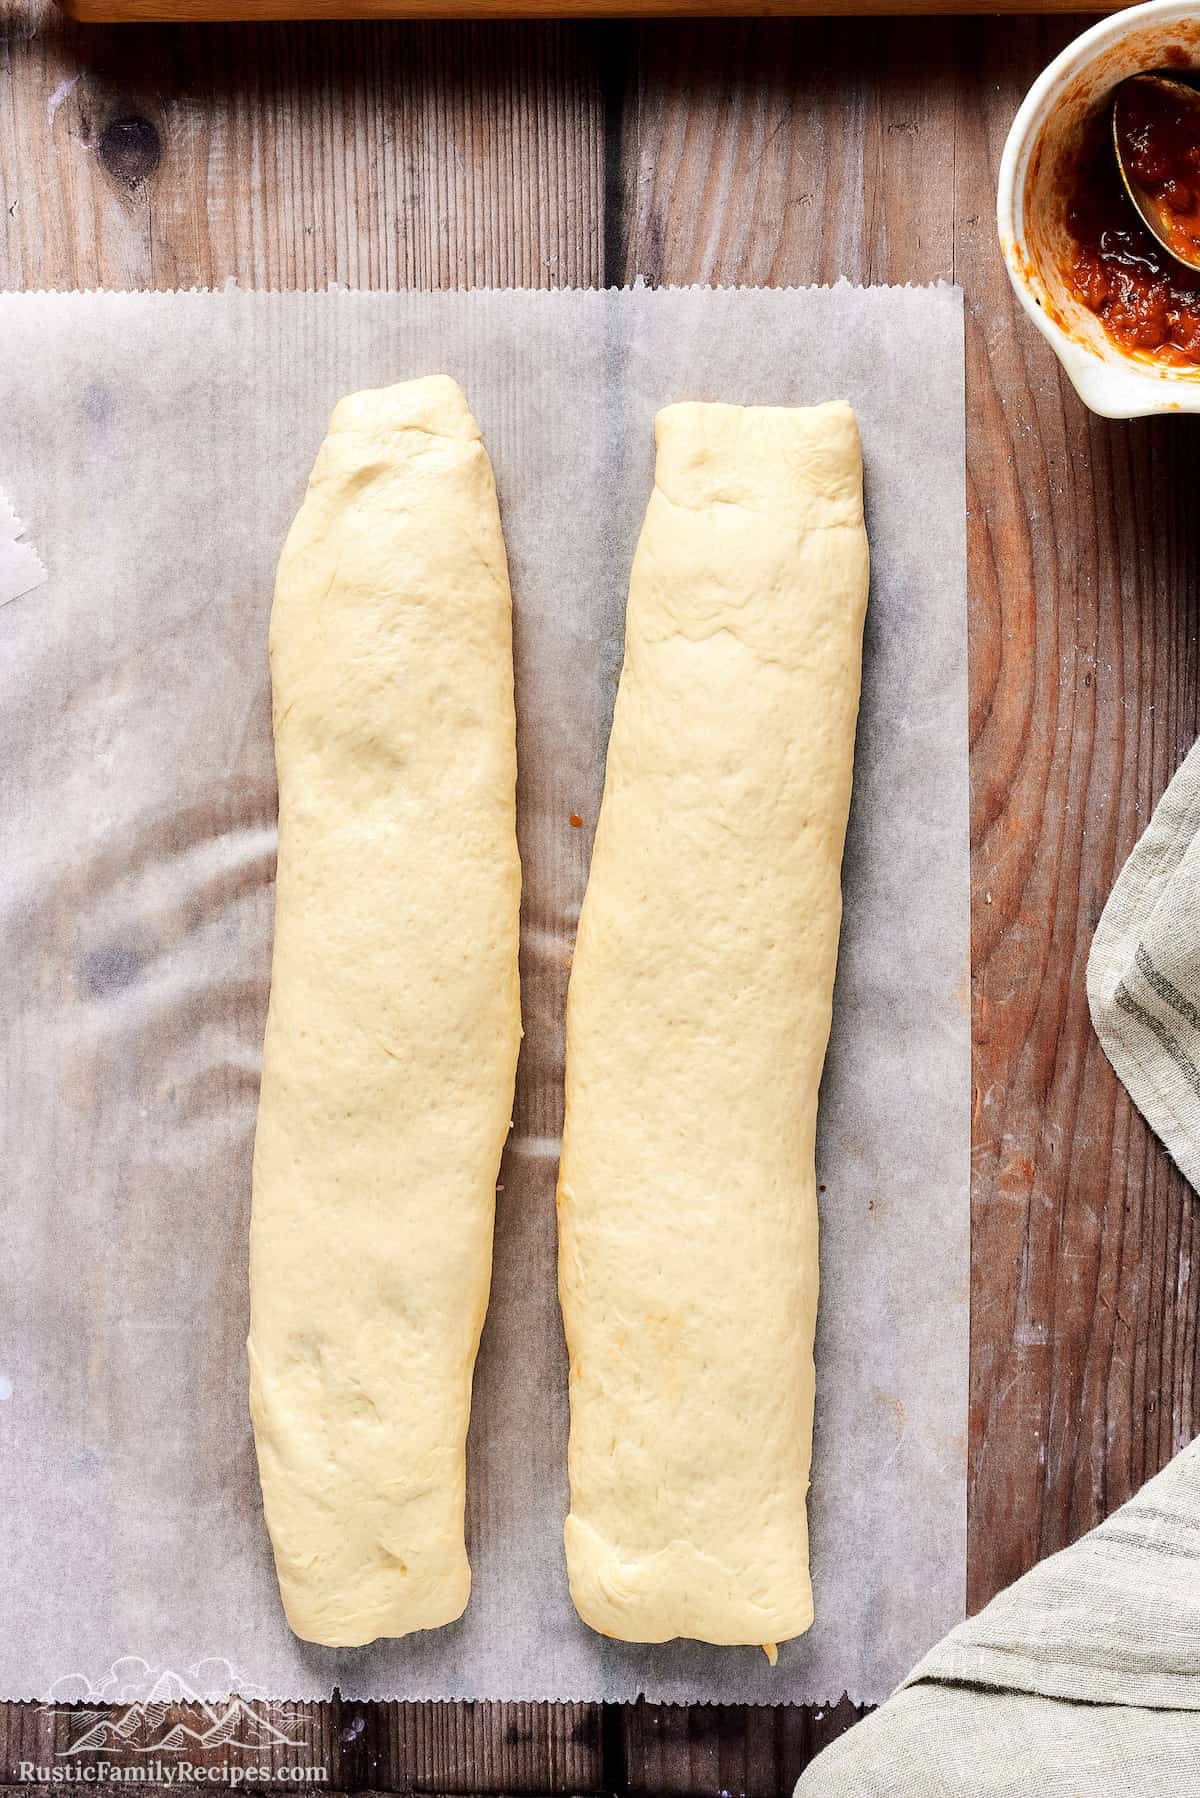 Two rolls up pizza dough pieces with sauce and cheese inside